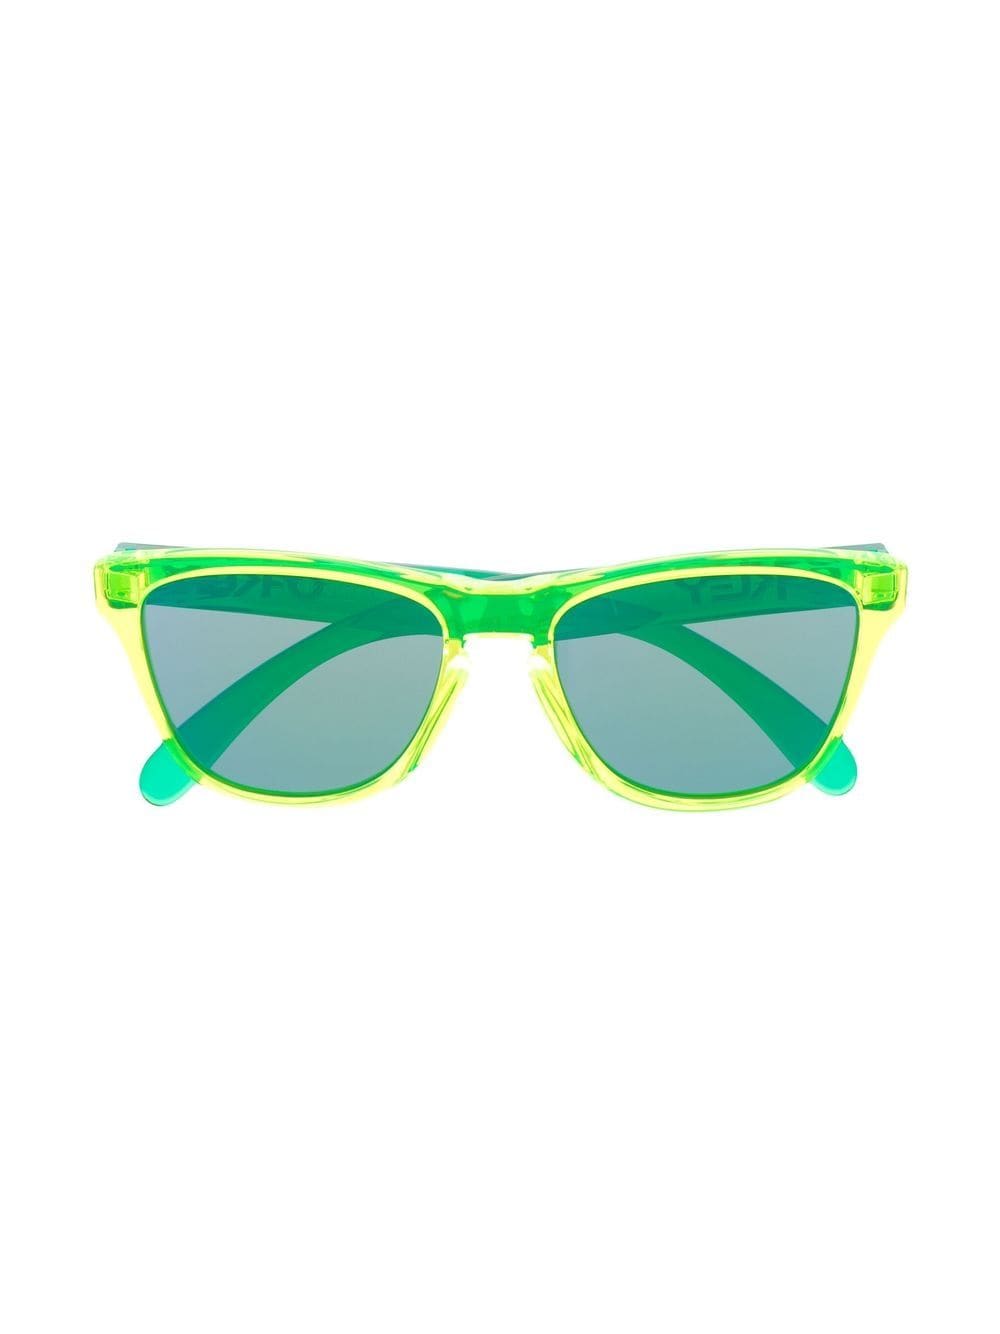 Green/yellow two-tone frame (Youth Fit) sunglasses